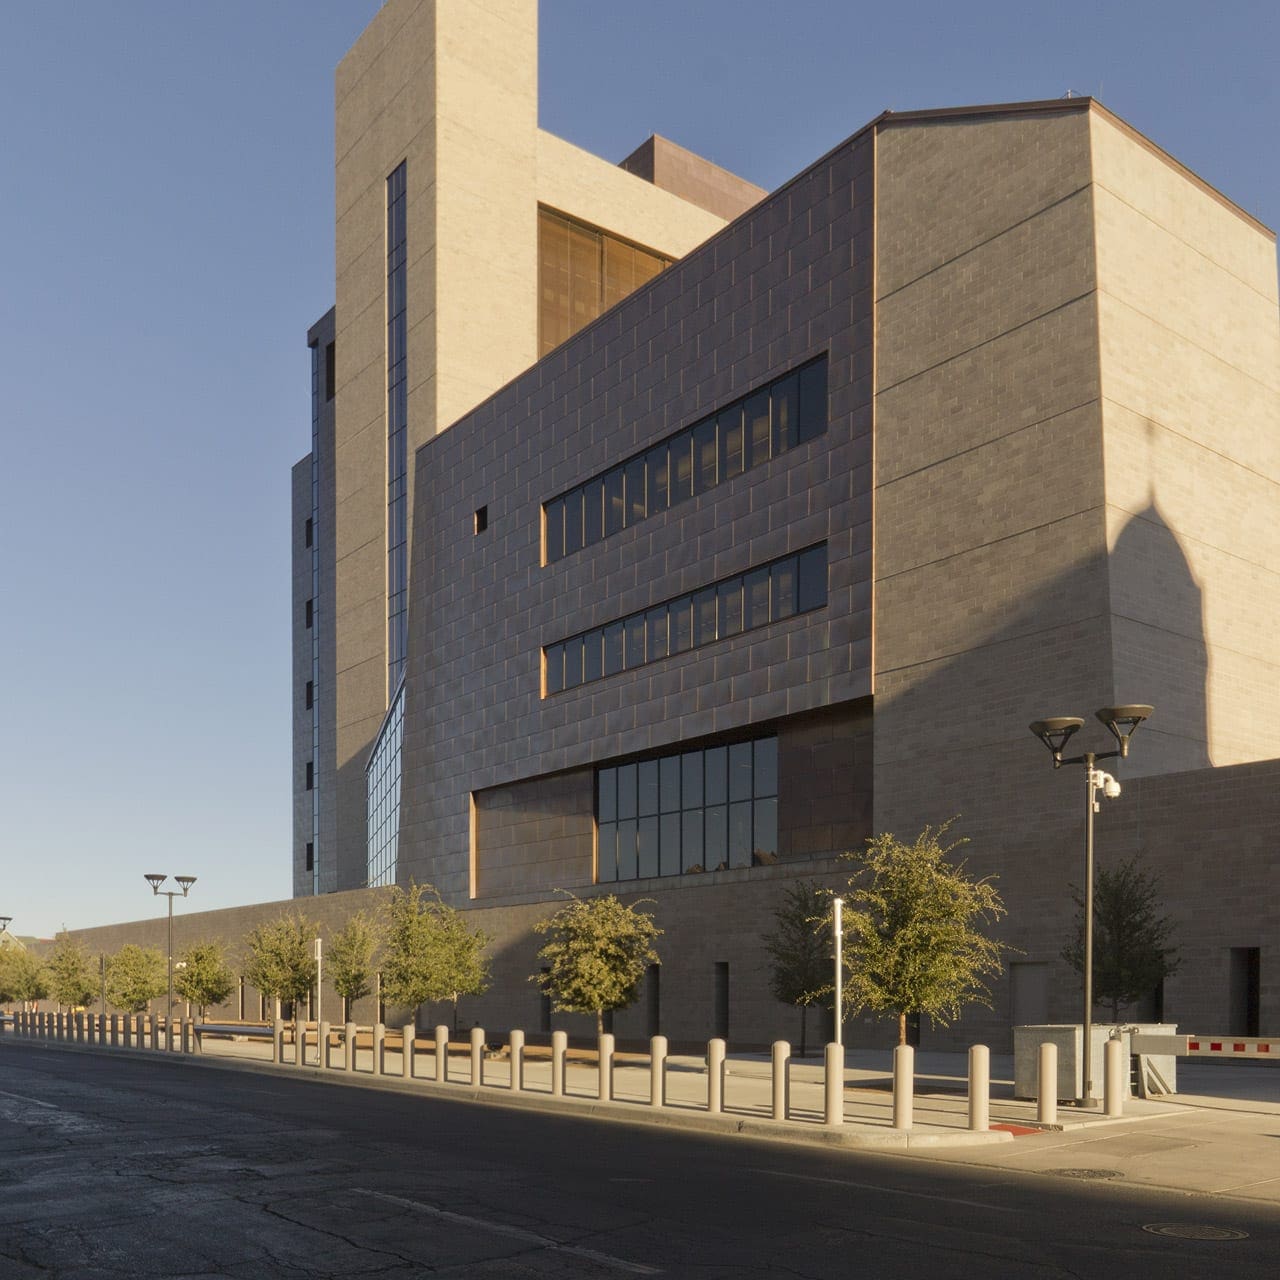 El Paso Courthouse viewed from the northwest.